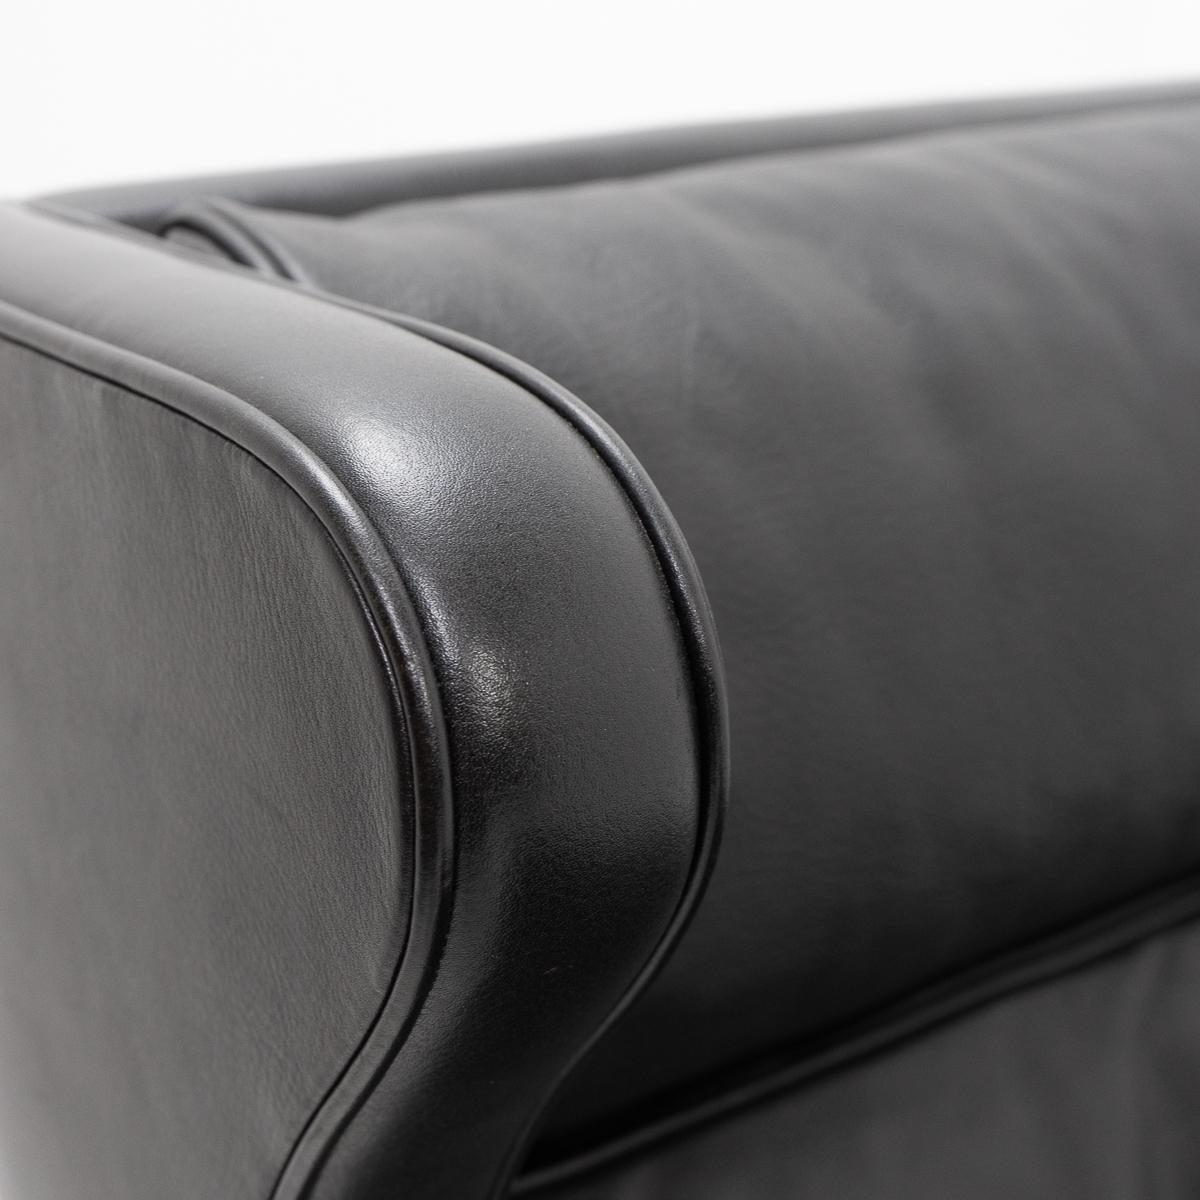 Design Classic Black Leather Wingchair and Footstool by Borge Mogensen, 1960s For Sale 6